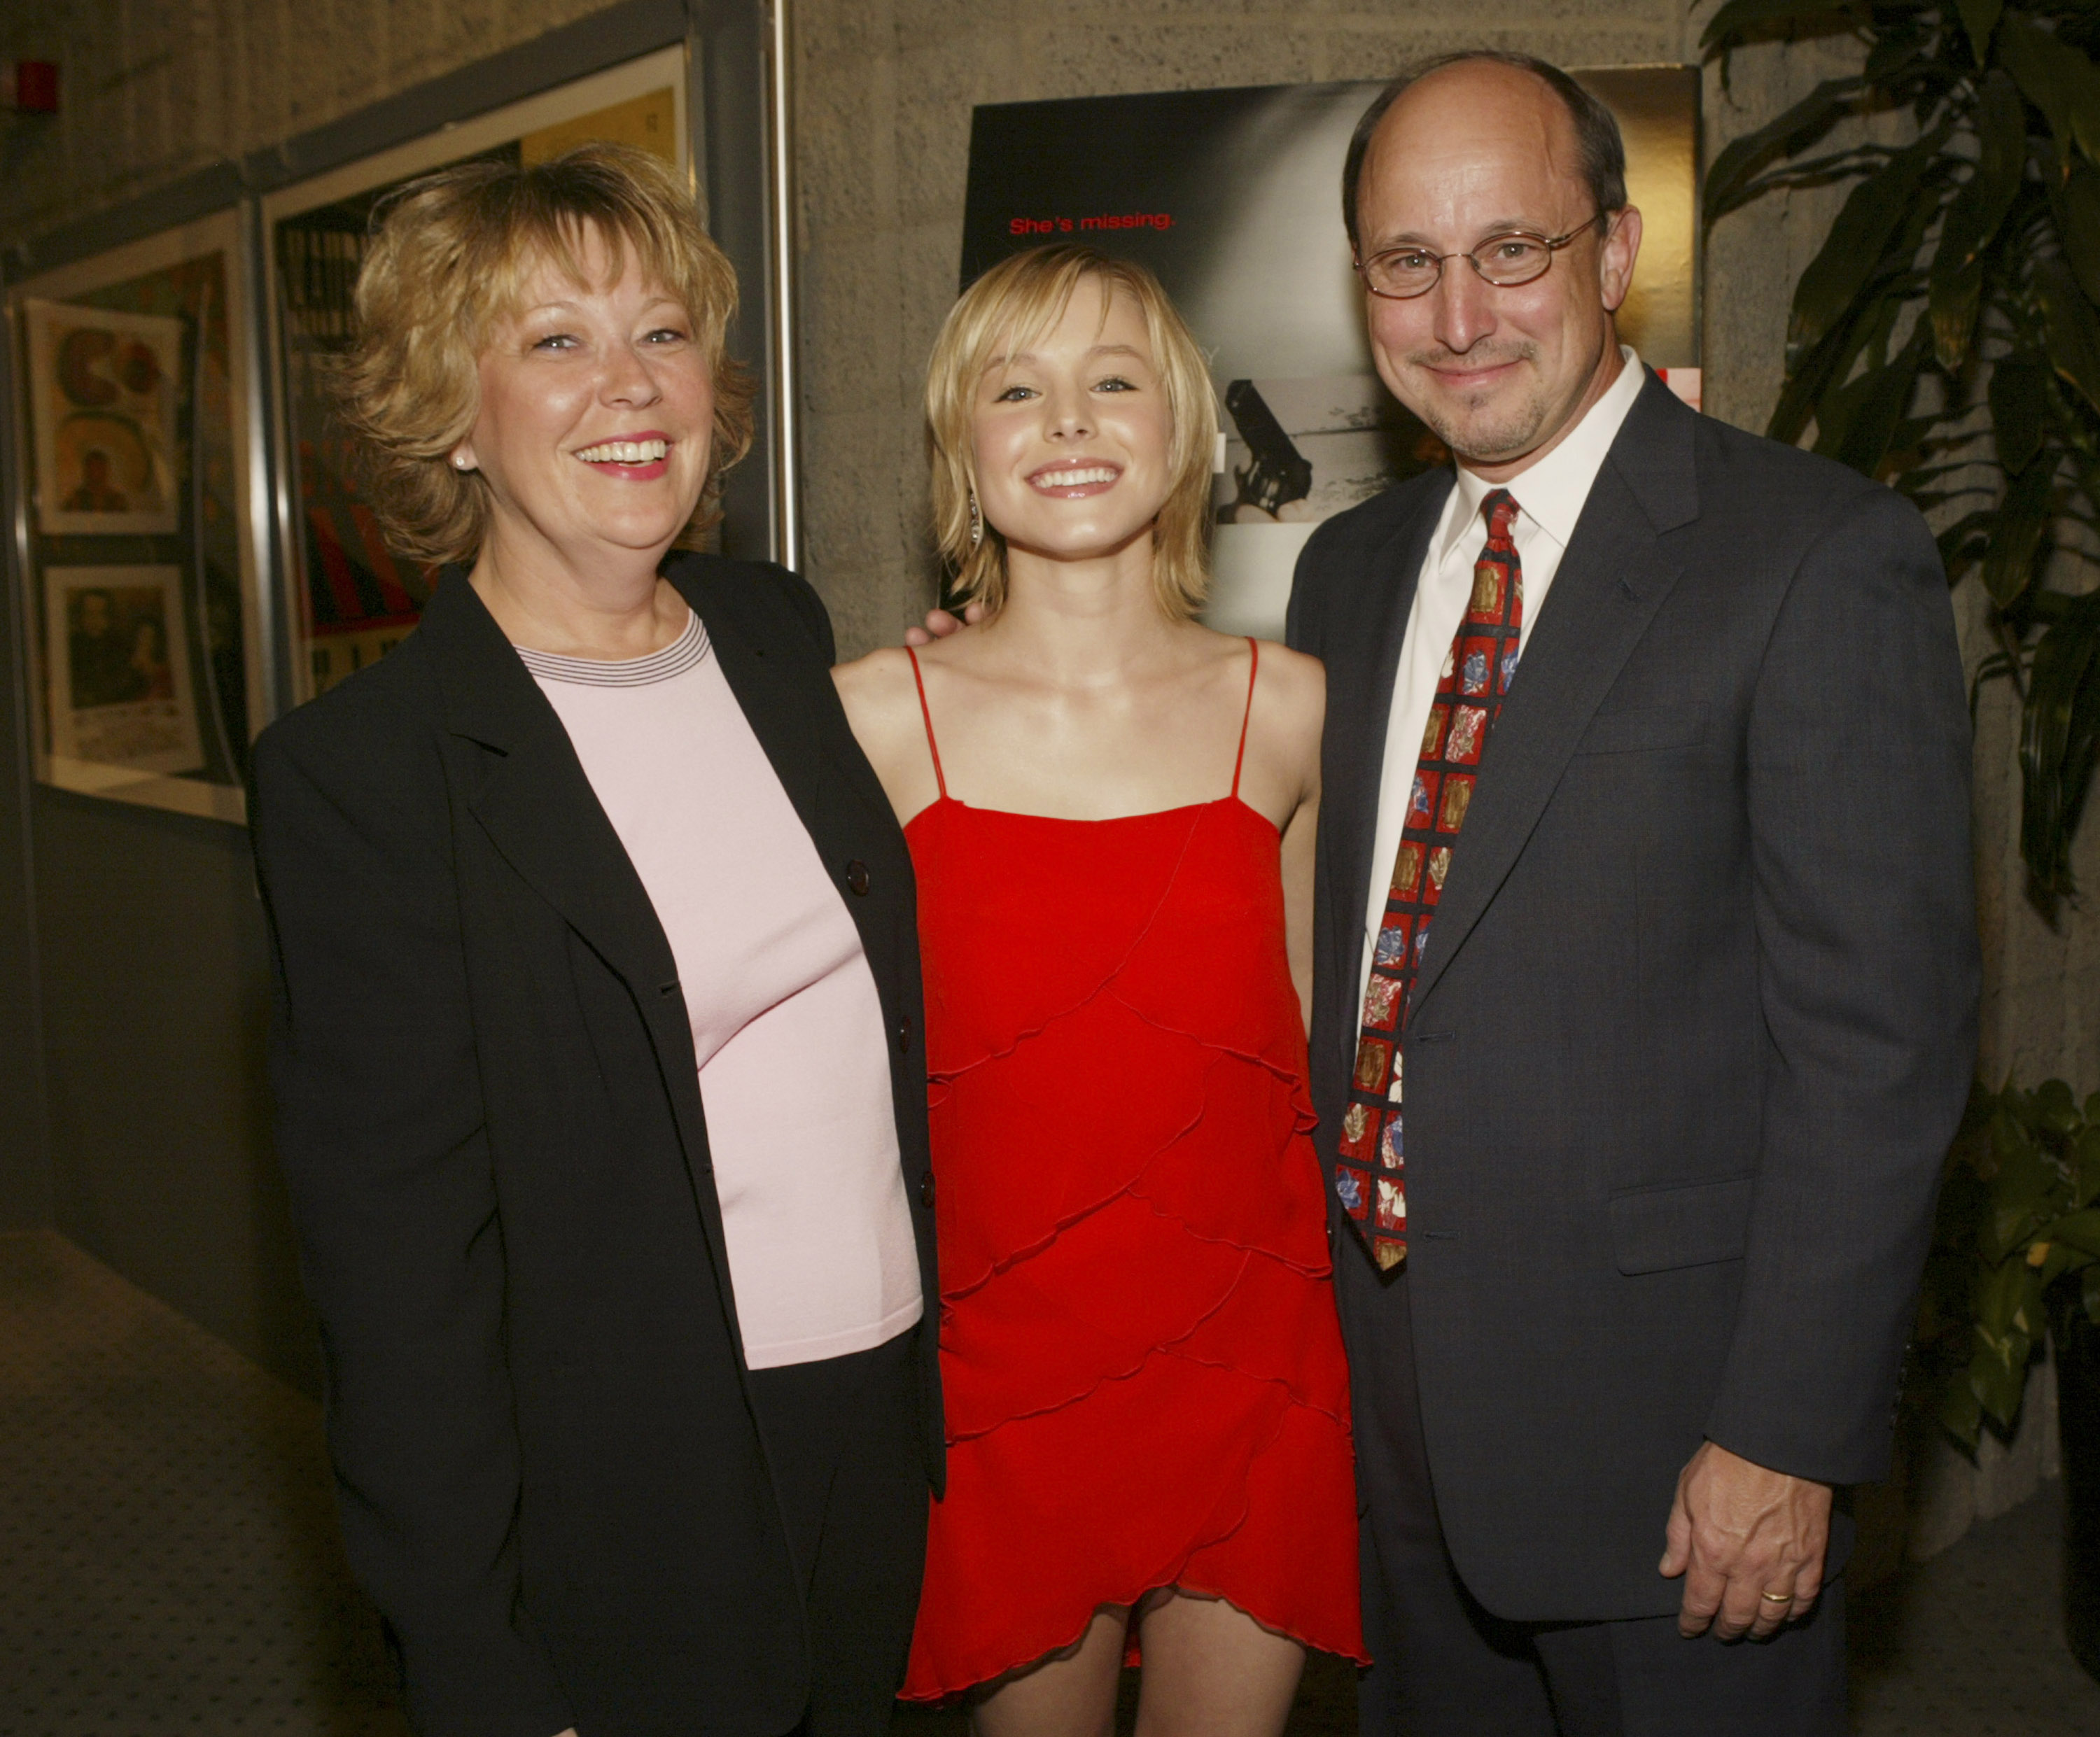 Kristen Bell pictured between her step-mother Kelly and father Tom Bell at the premiere of the film "Spartan" on March 8, 2004, in Los Angeles, California. | Source: Getty Images